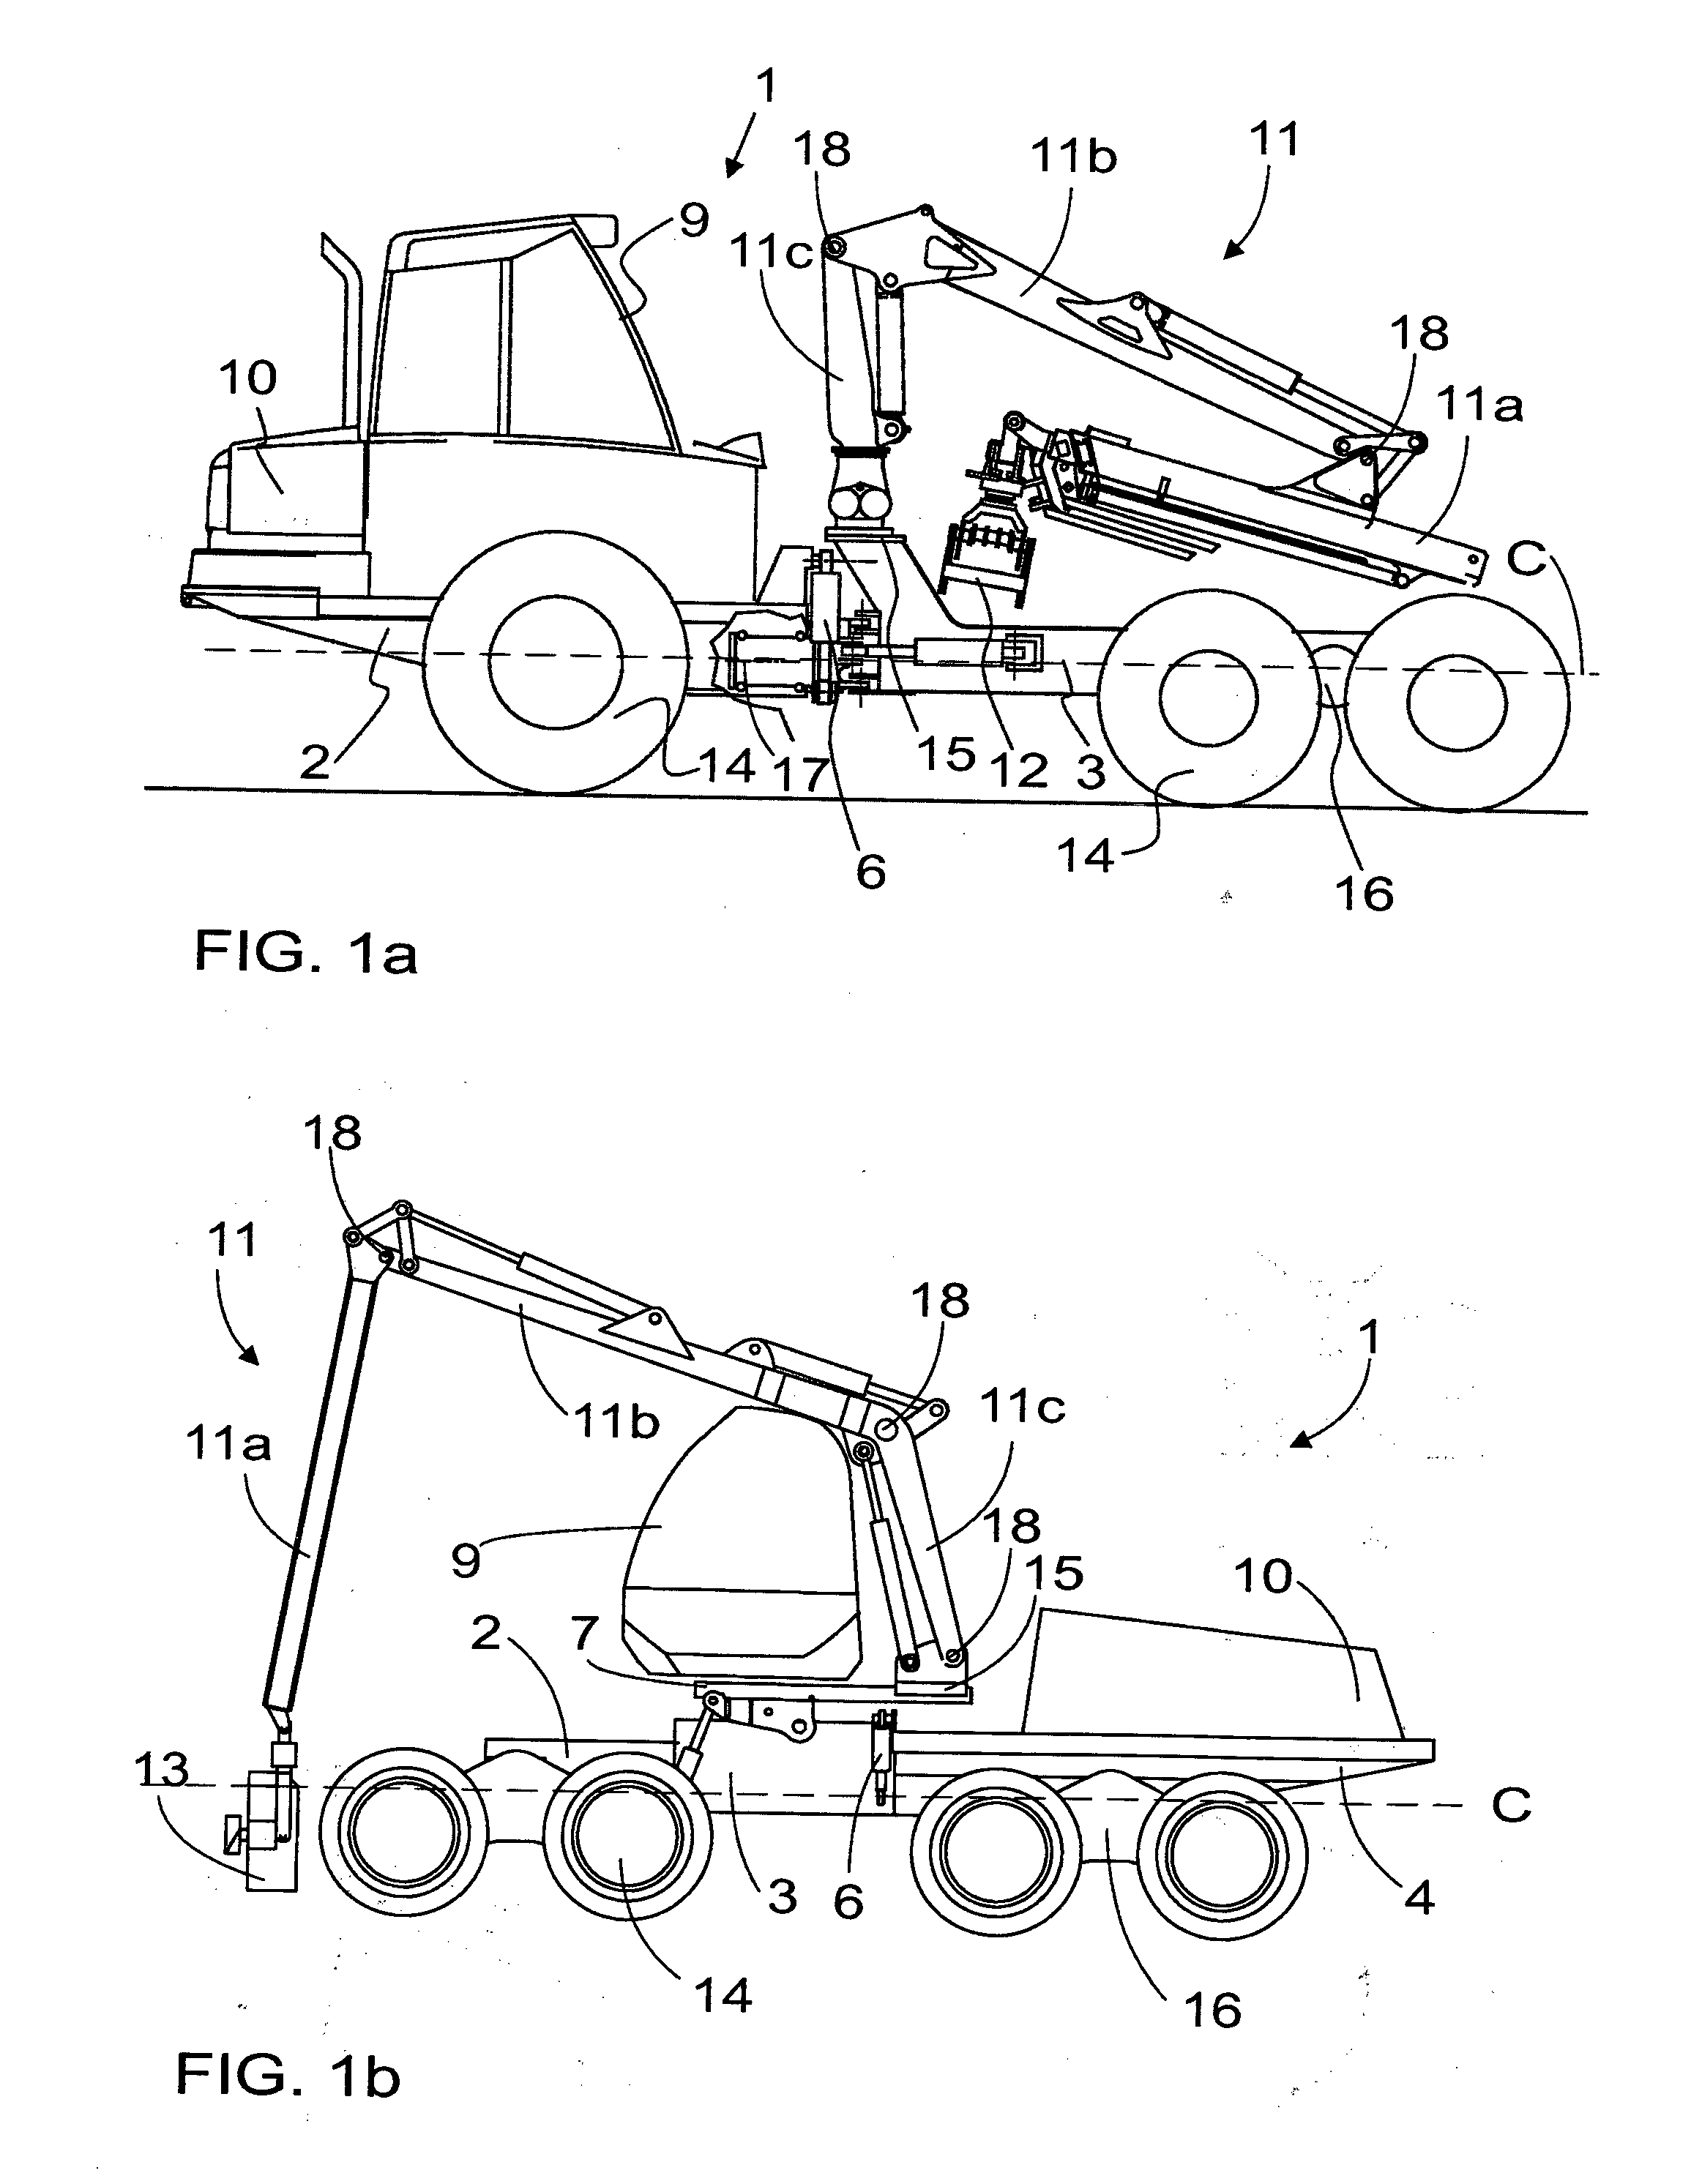 Detector arrangement in connection with a mobile work machine